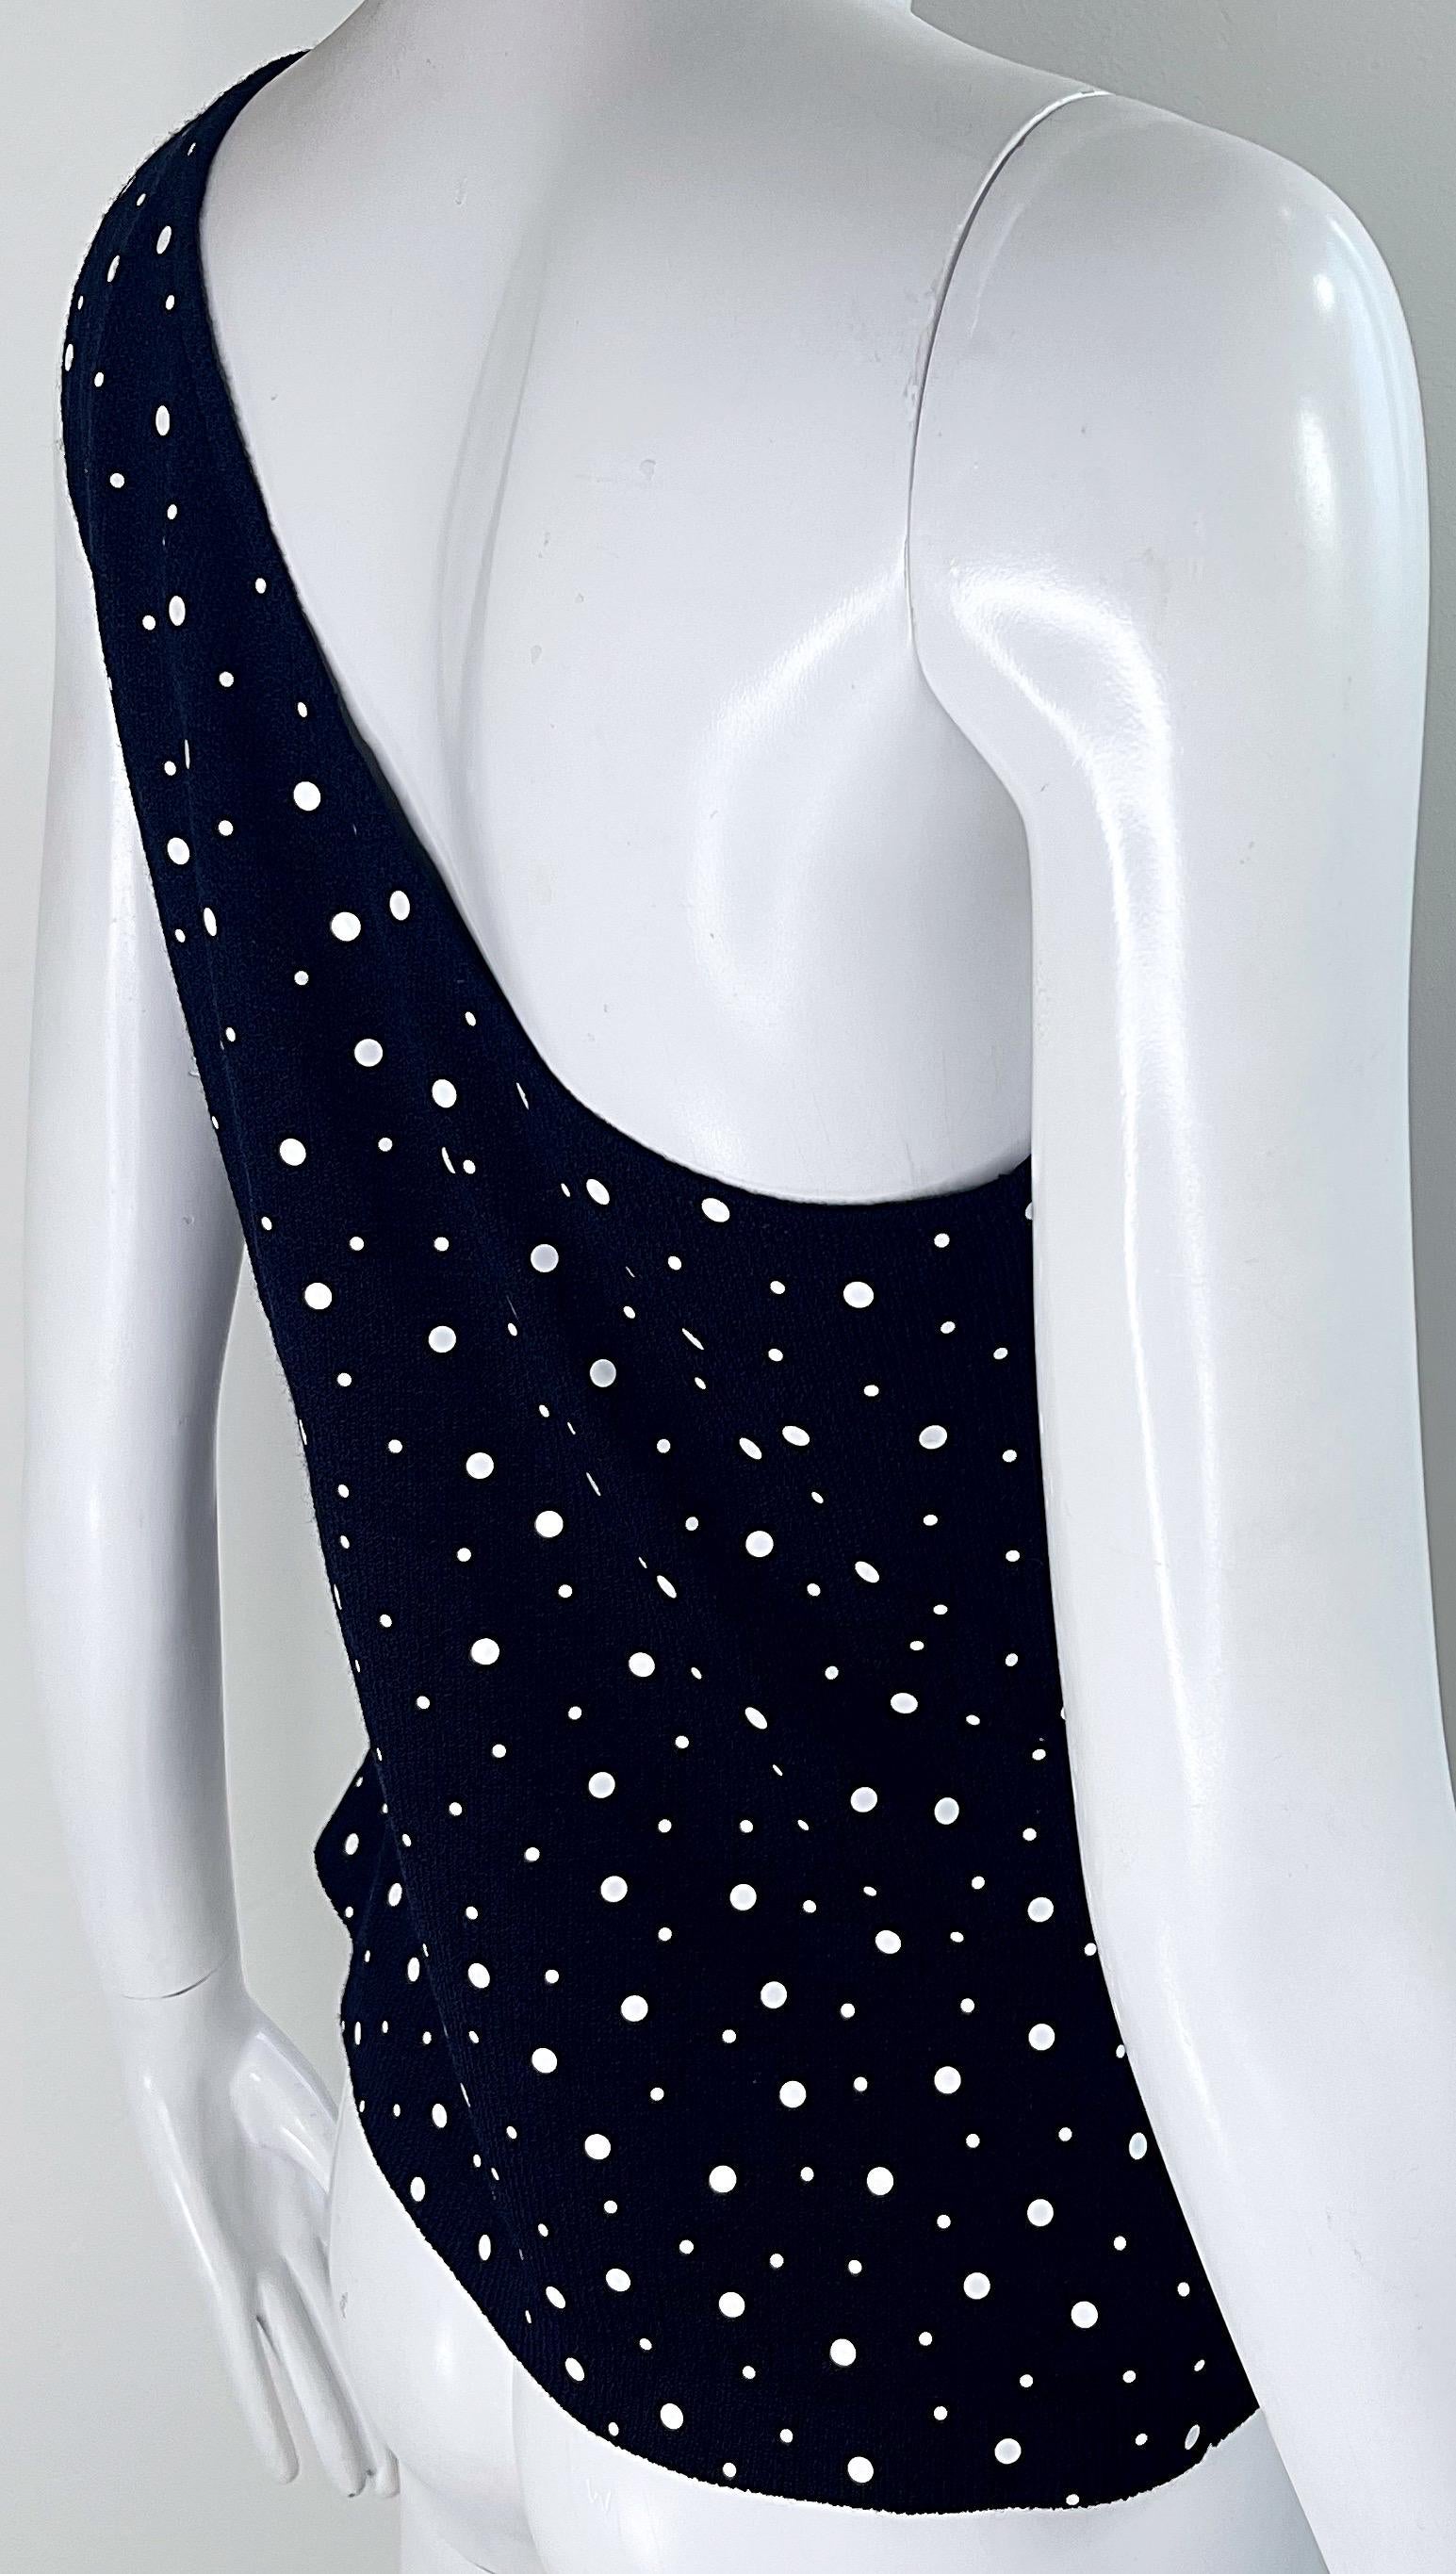 NWT 1990 I. Johns Collection by Marie Gray Size 8 Black White Polka Dot Top en vente 8